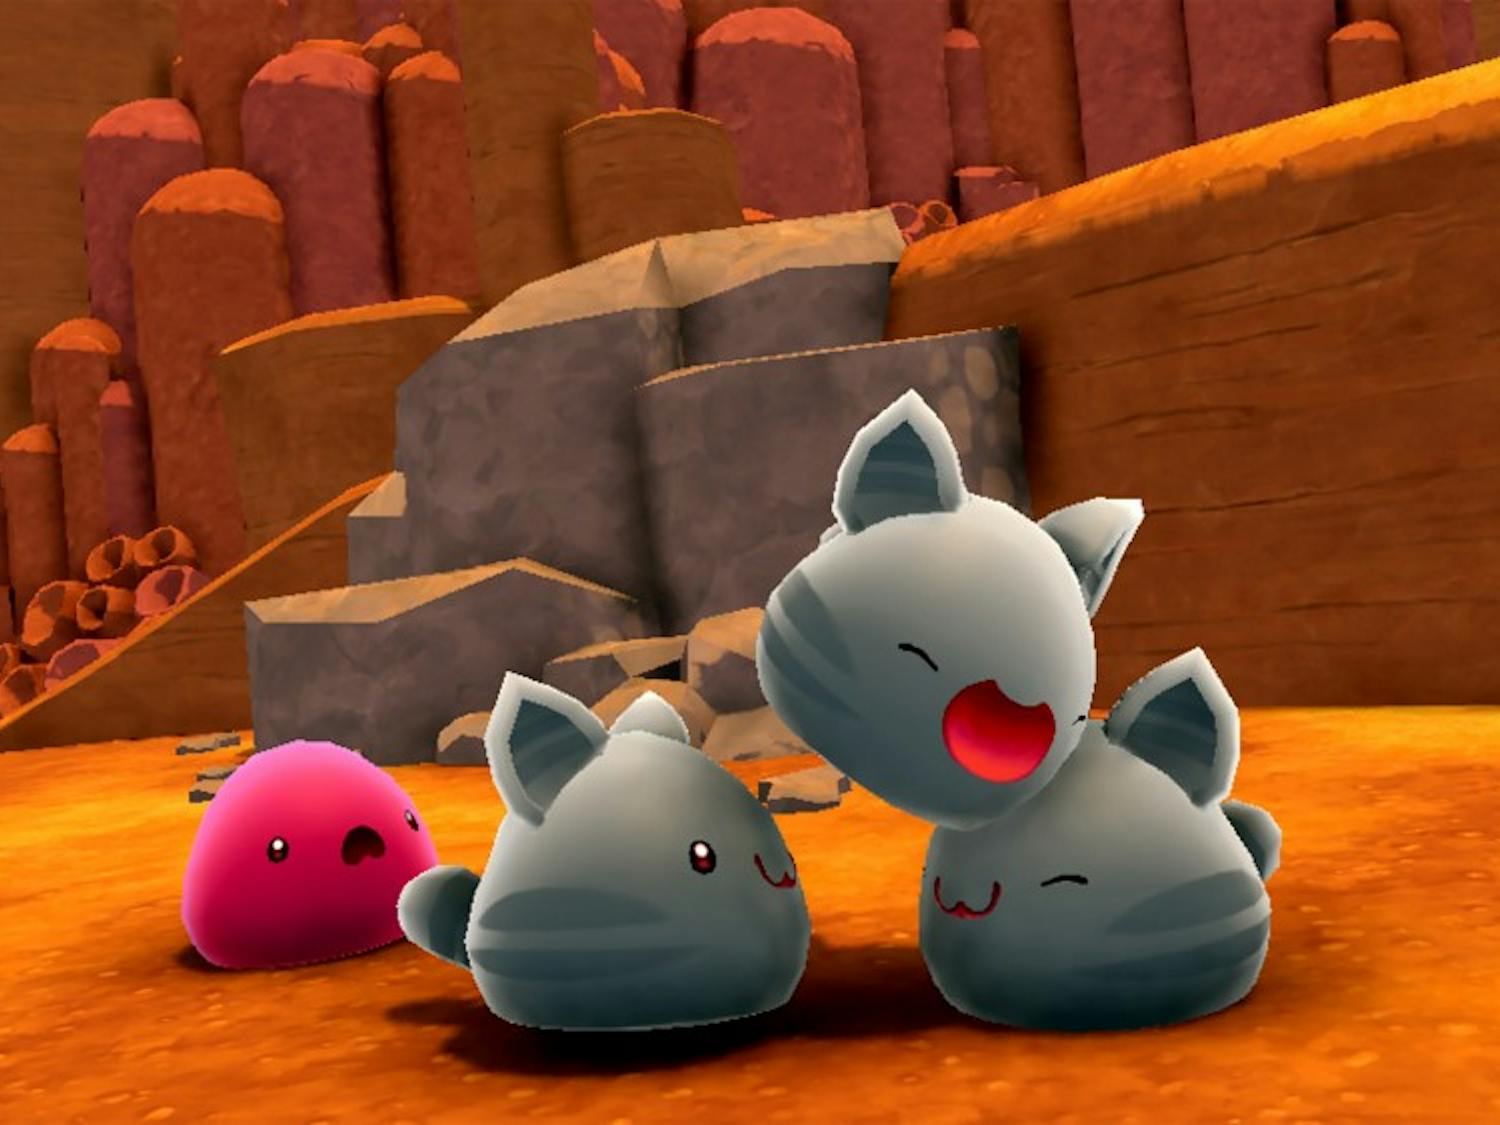 A pink slime feels left out as three tabby slimes play around. “Slime Rancher” features themes of loneliness and long-distance love that the millennial generation can especially relate to.